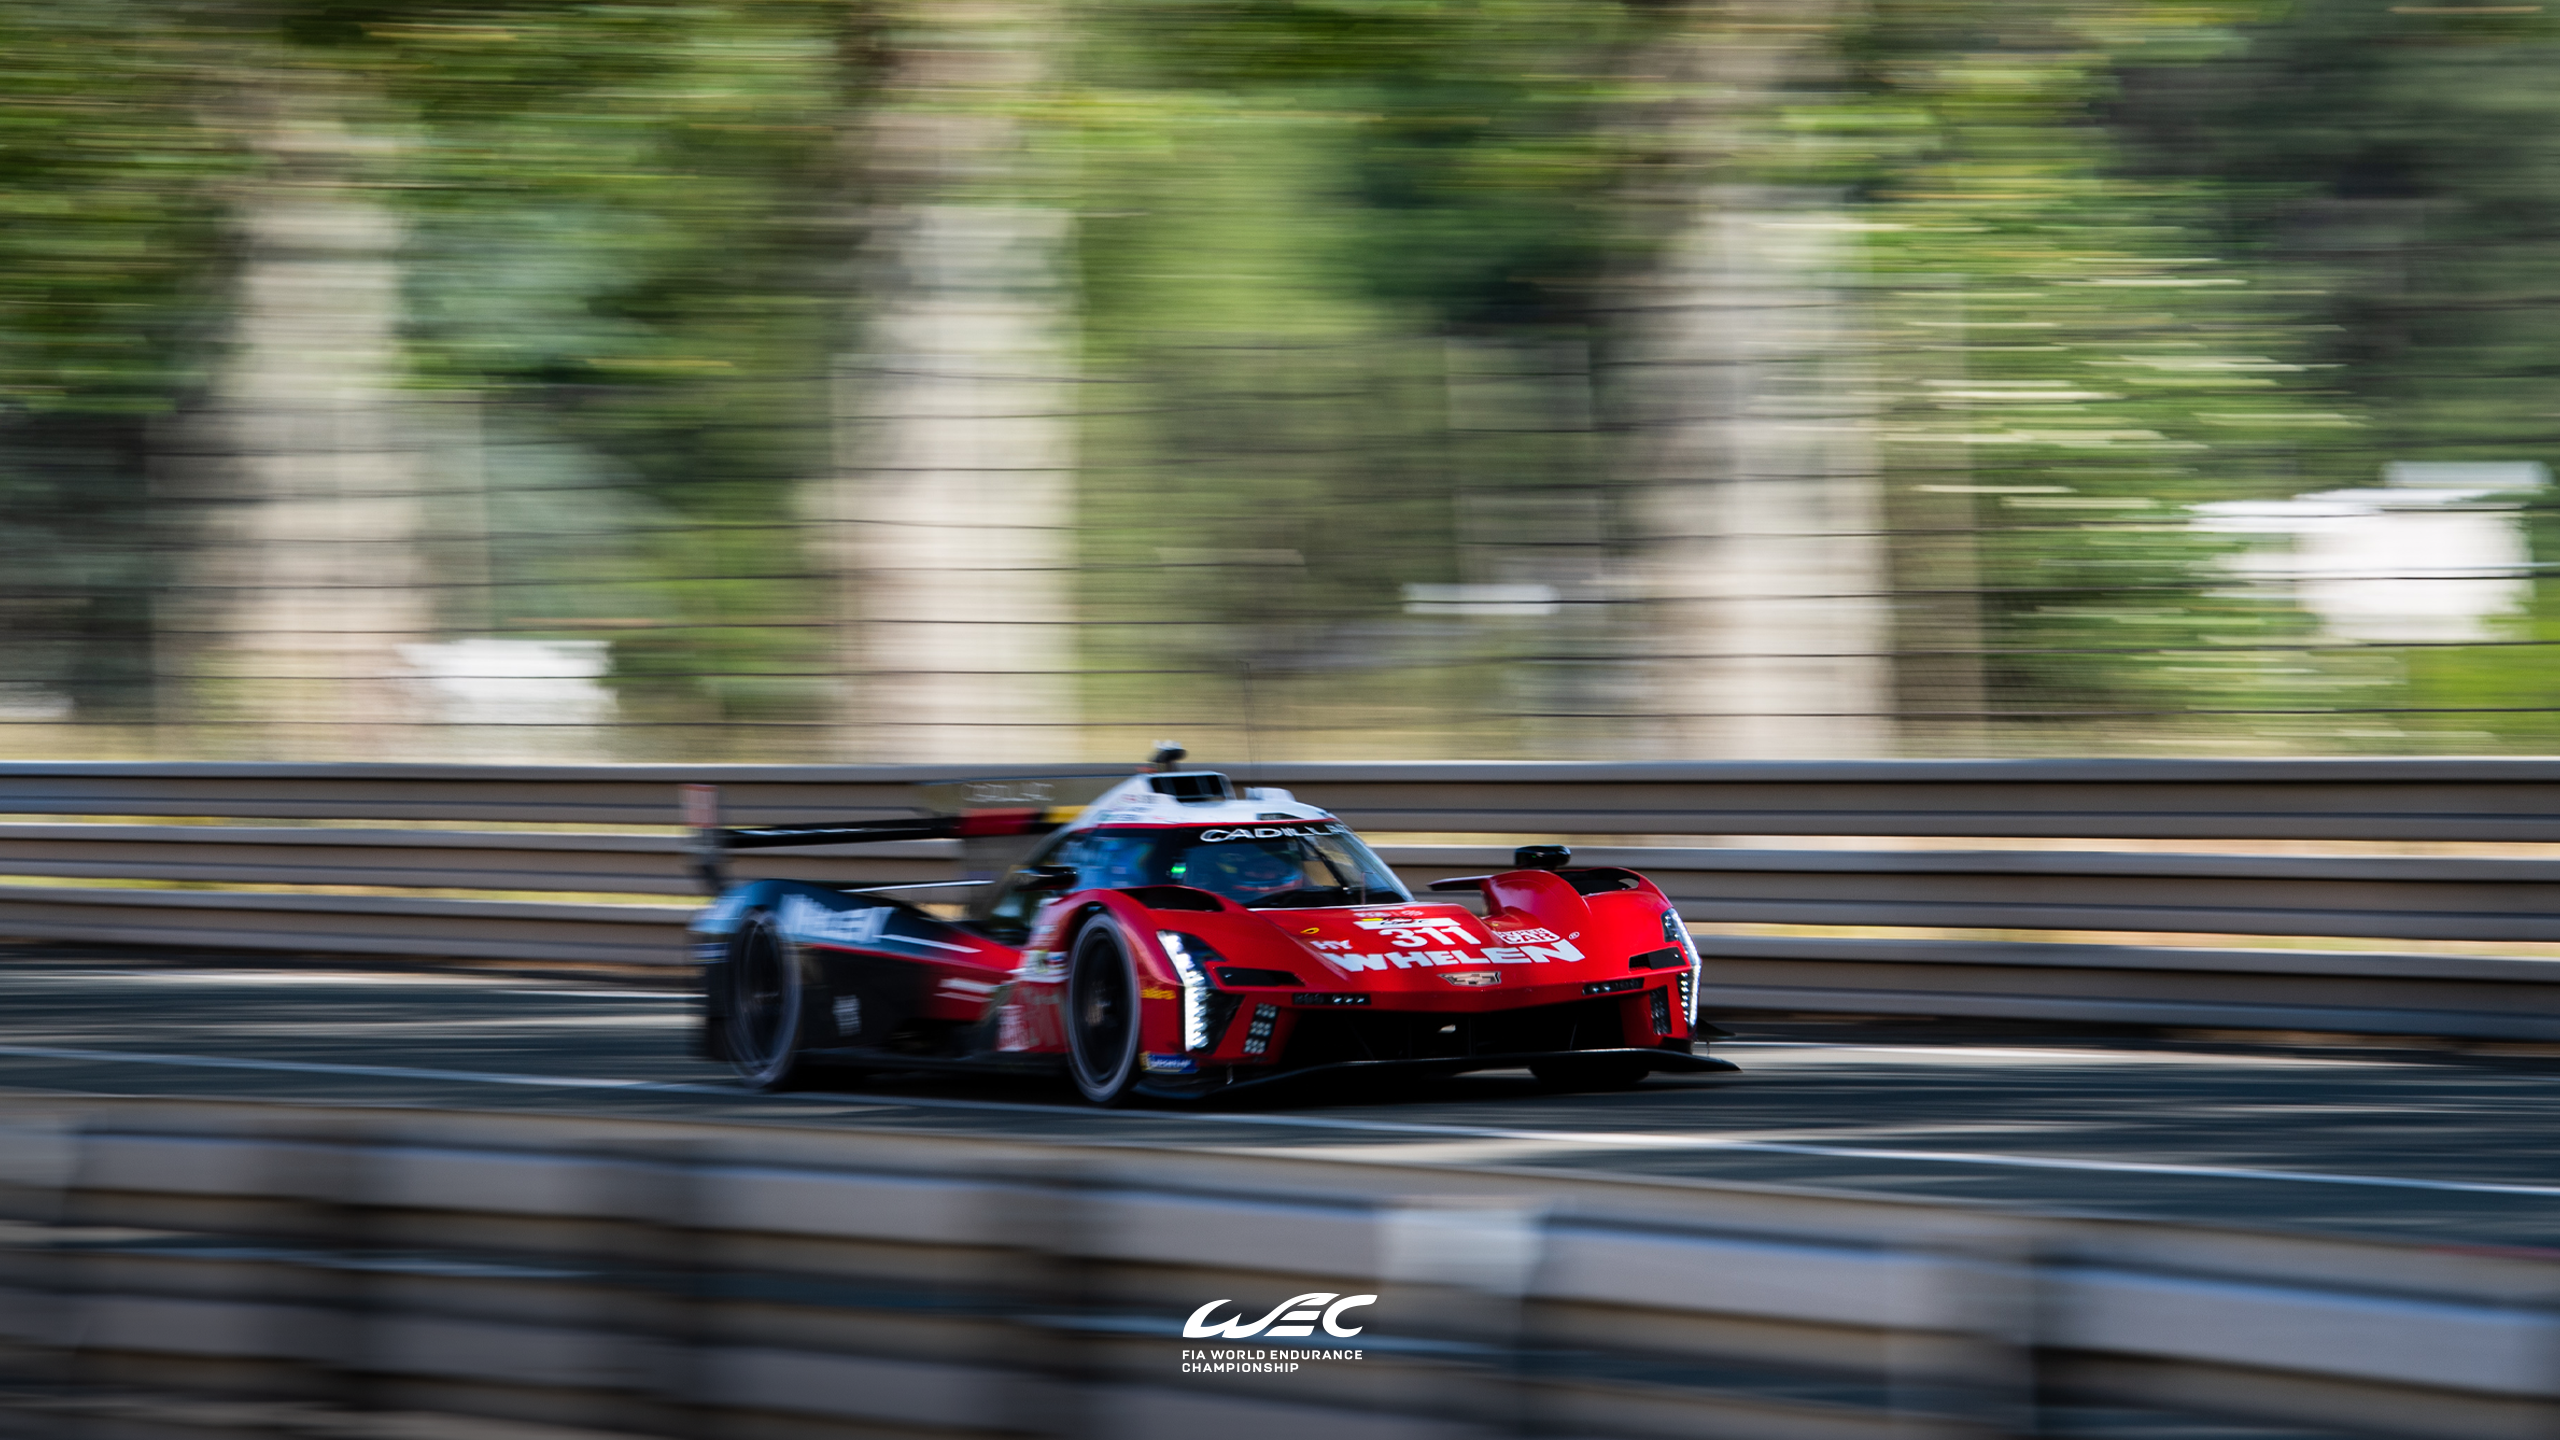 Motorsport Race Cars Night Dawn Hybrid Car Landscape Racing Stripes Cadillac Front Angle View Blurre 2560x1440